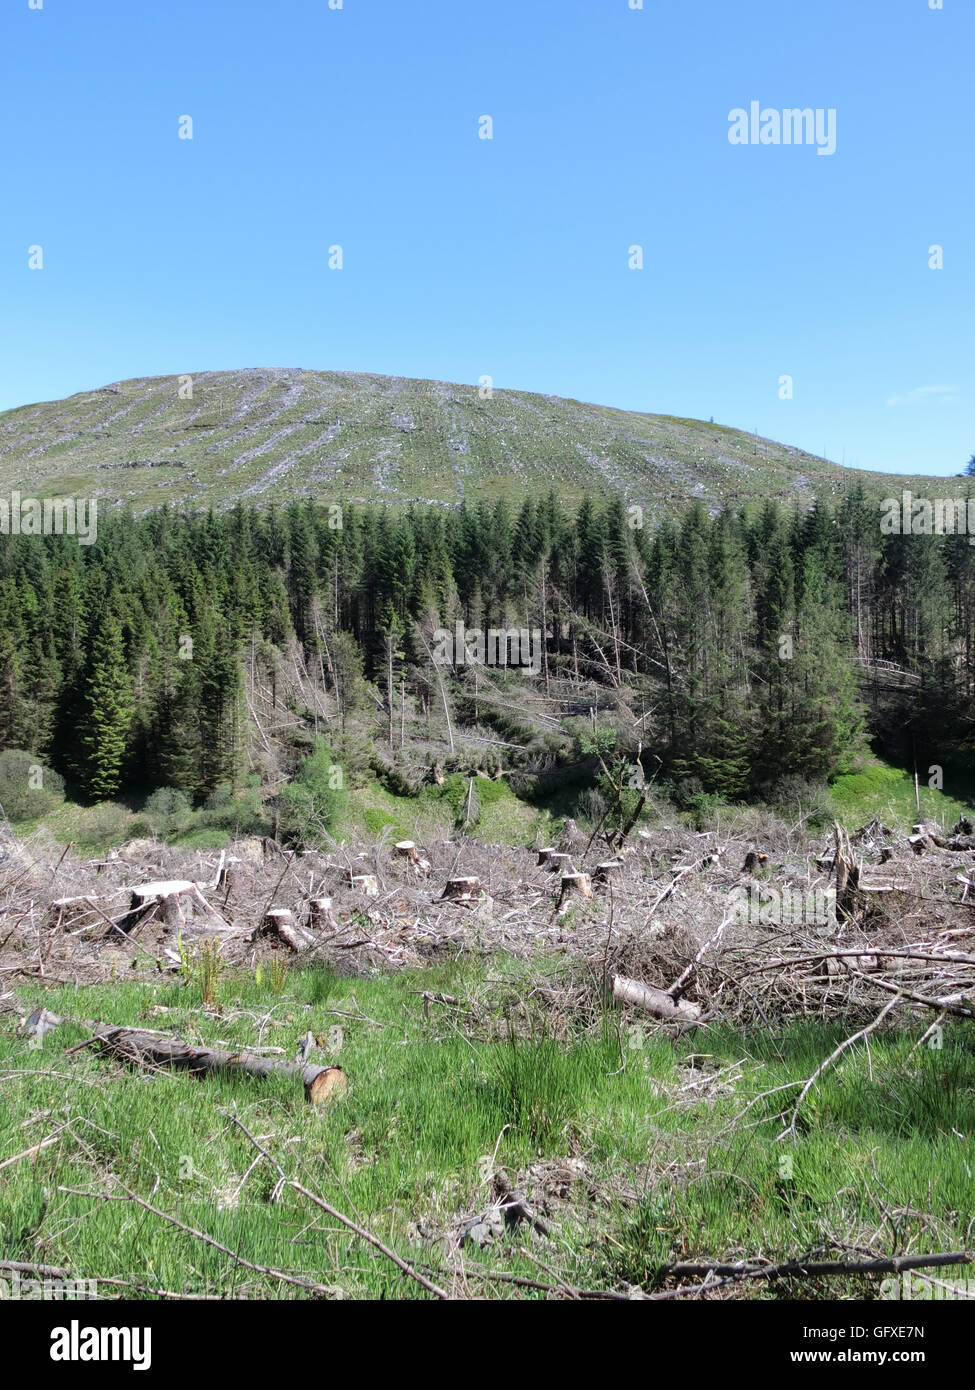 Timber Harvesting, Gamescleuch Hill, Ettrick Valley, Borders, Scotland, UK Stock Photo